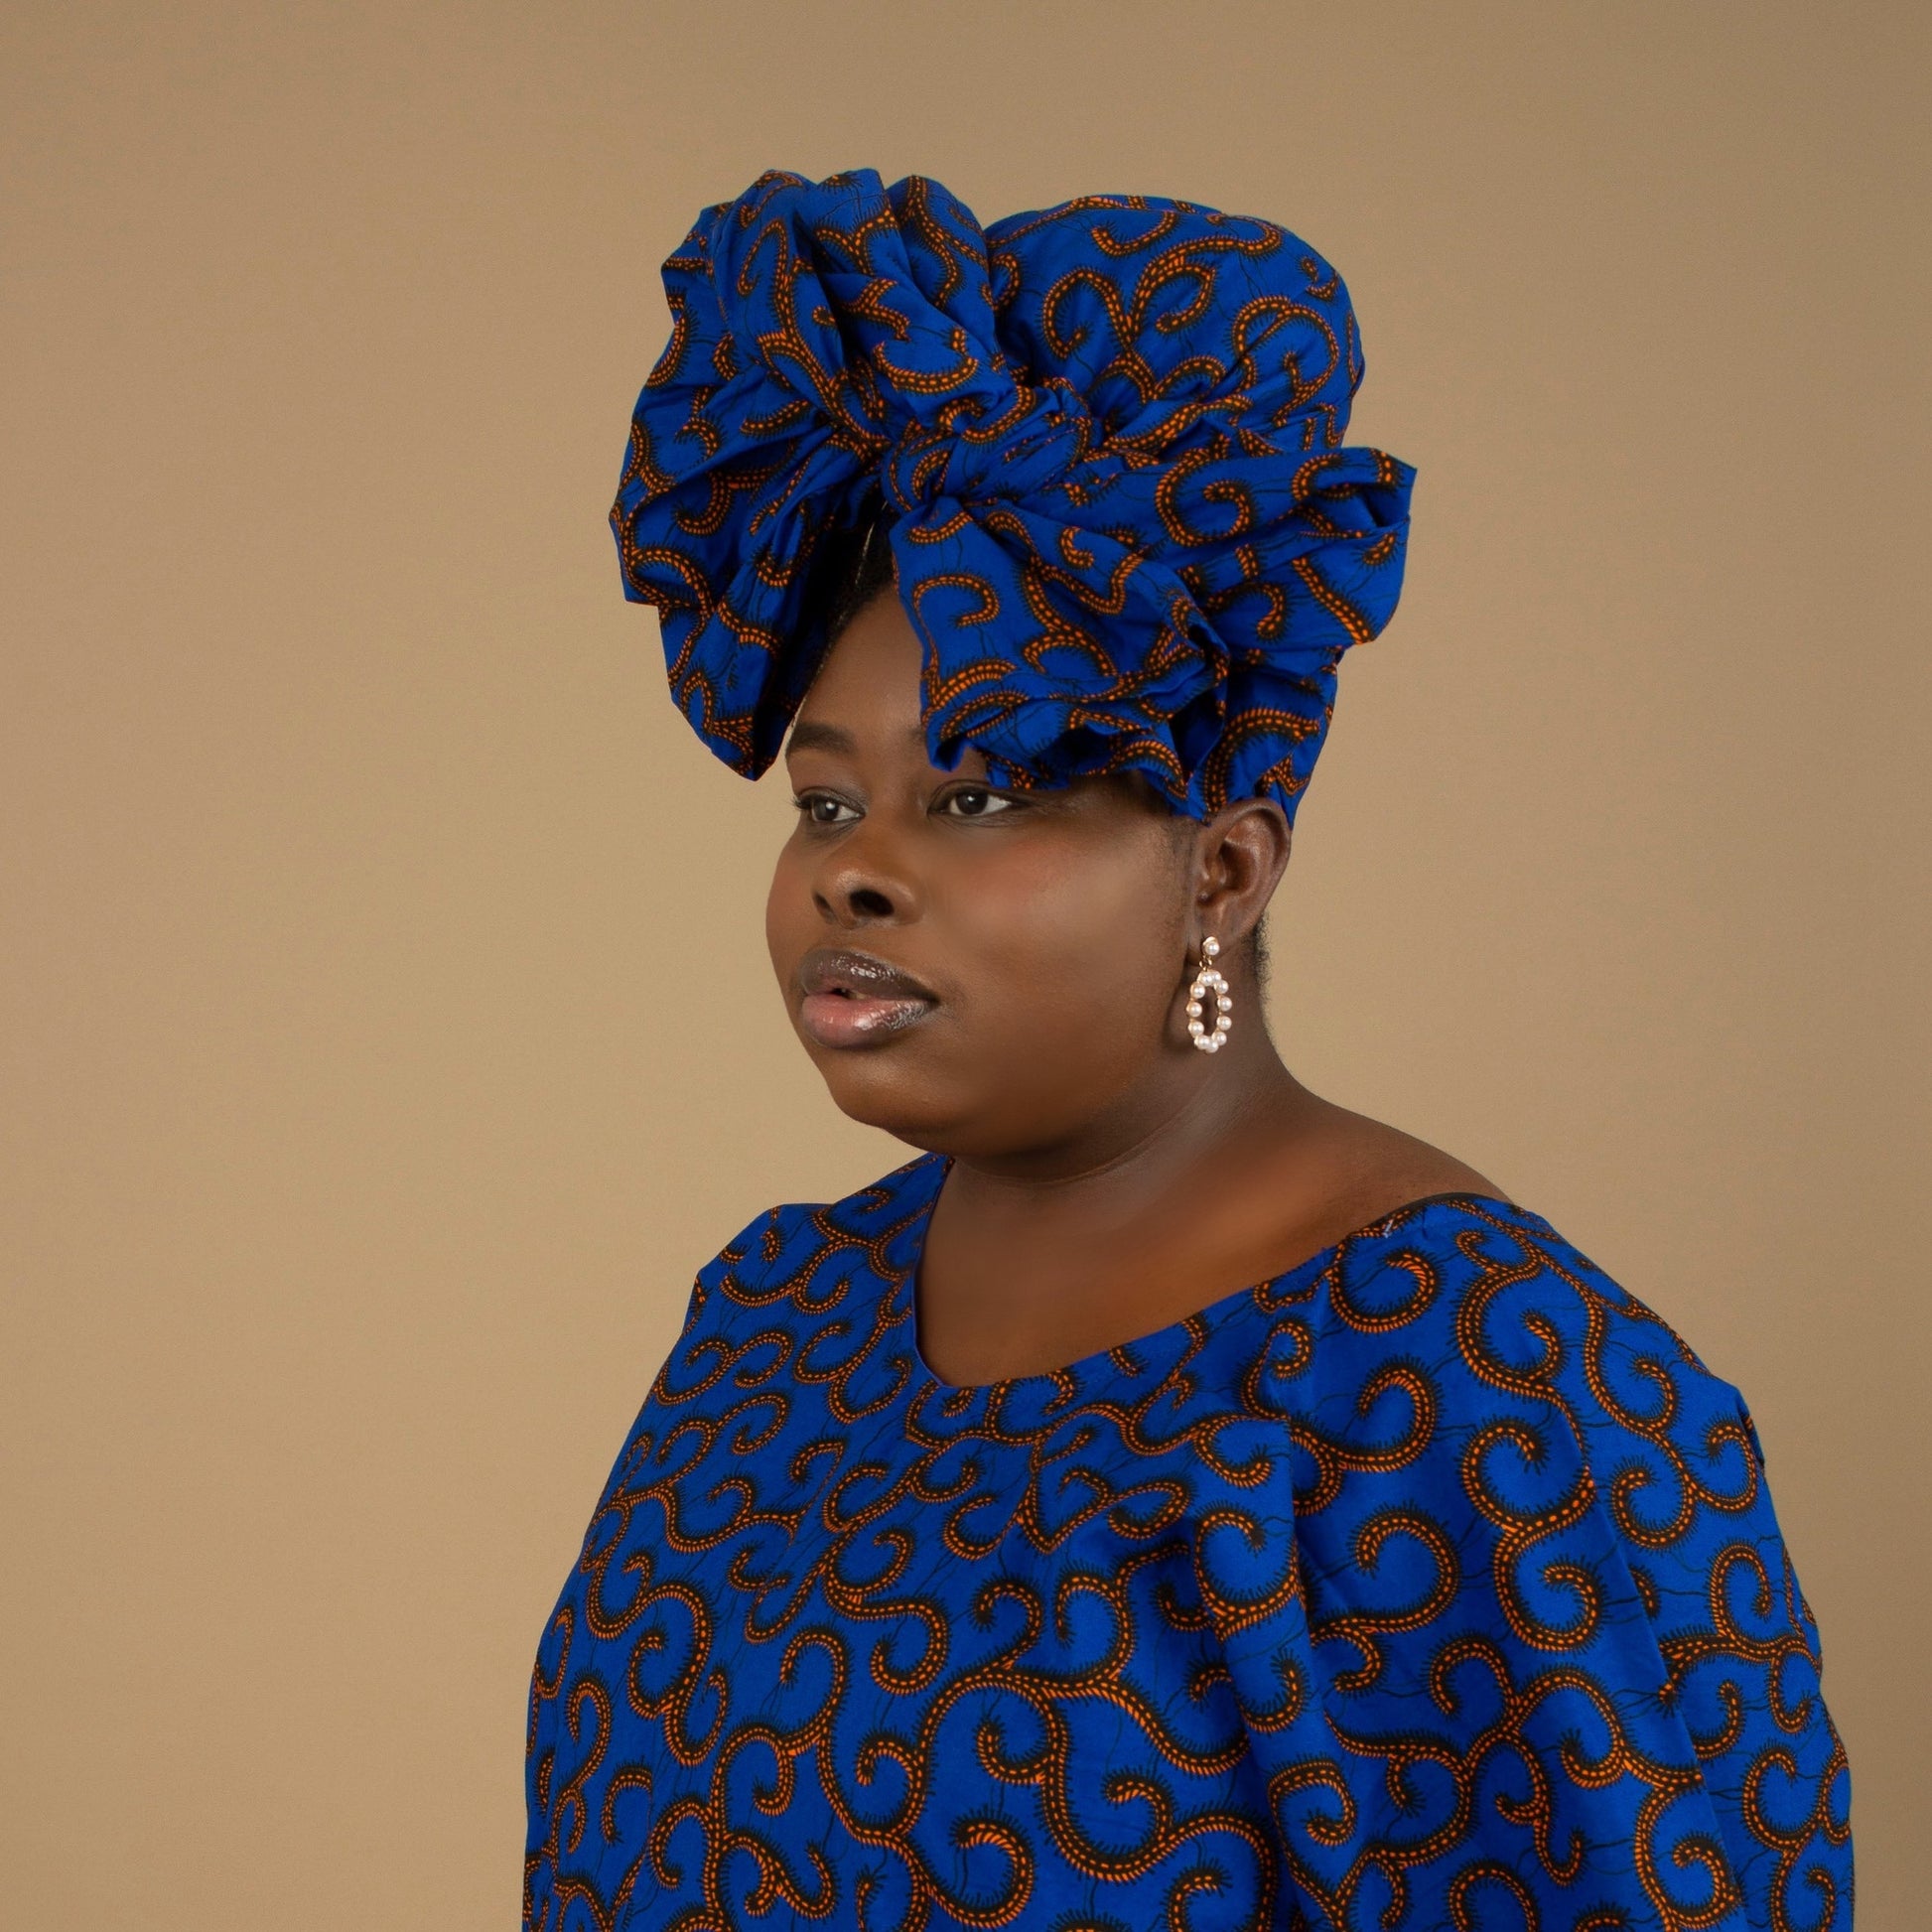 The Ore African Print Head Wrap is a lightweight African Print hair accessory that is ethically produced sourced cotton. The Ankara wax print in a gorgeous blue and orange swirling African Print pattern. Designed in England Made in Nigeria, Available Sizing: Small - 44" x 9" / 109cm x 22cm&nbsp; Large - 70" x 22" / 182cm x 55cm.